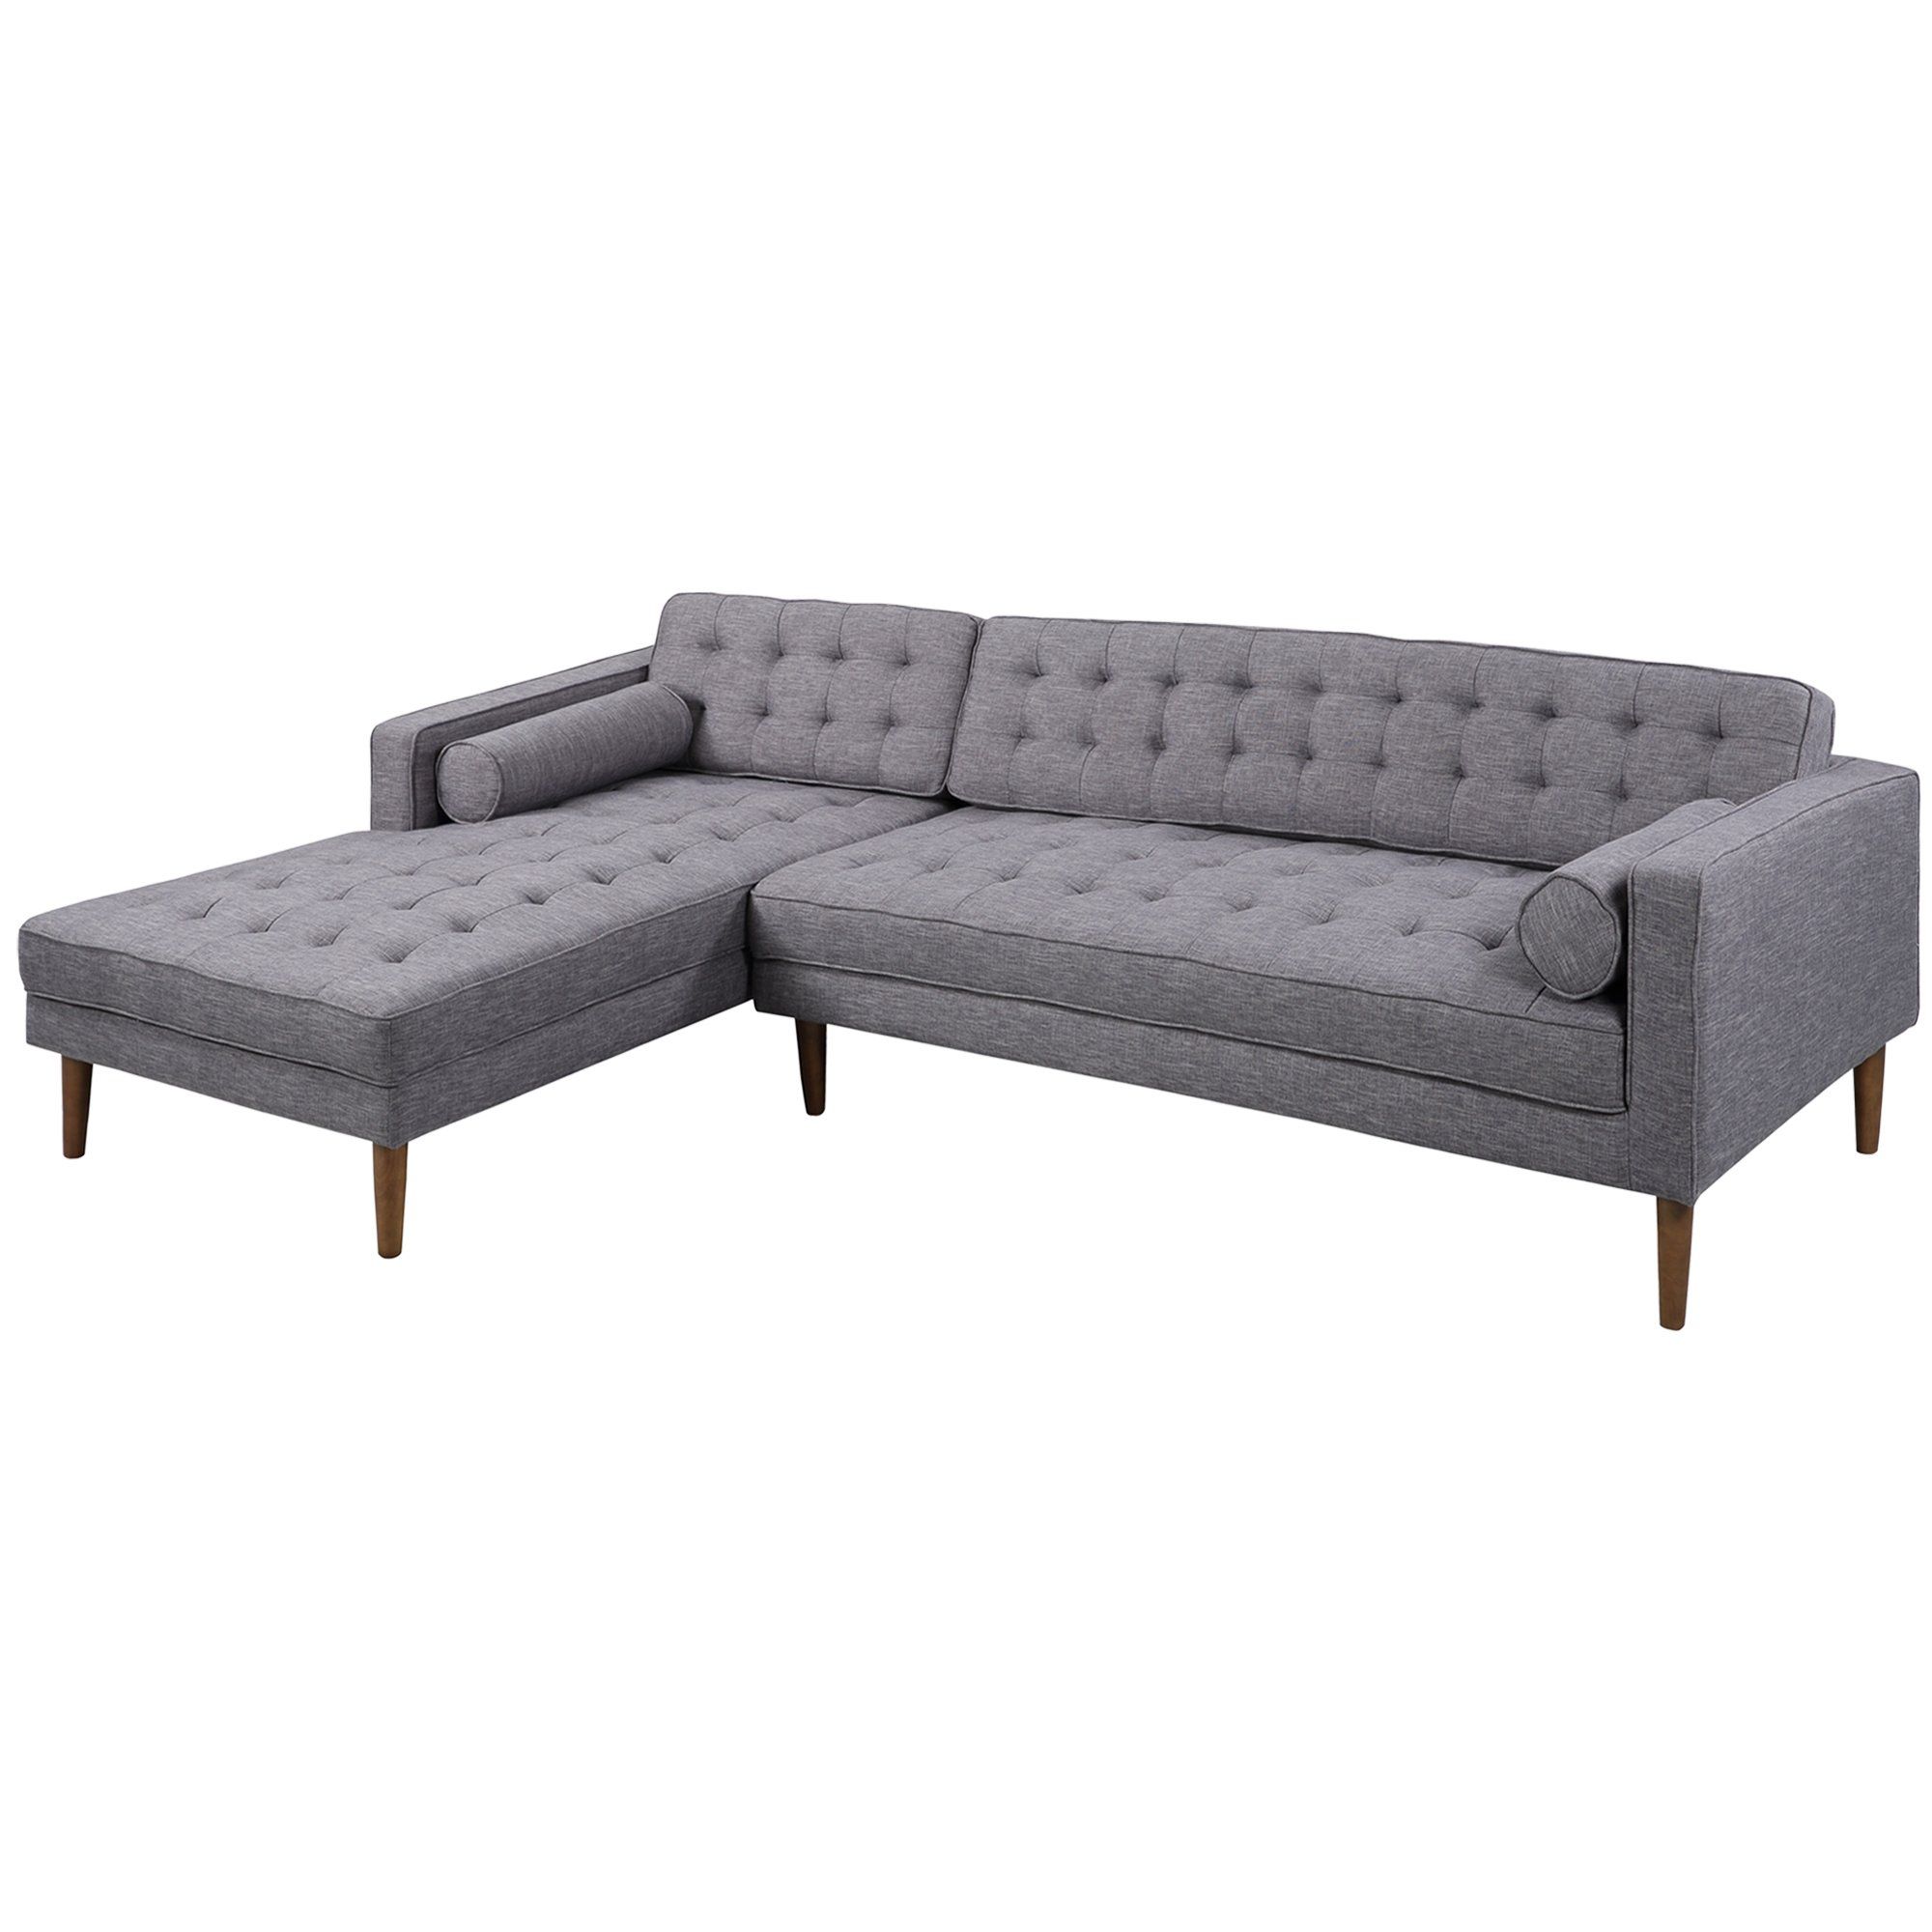 Armen Living Lcelchdgle Element Left Side Chaise Sectional With Regard To Element Left Side Chaise Sectional Sofas In Dark Gray Linen And Walnut Legs (View 5 of 15)